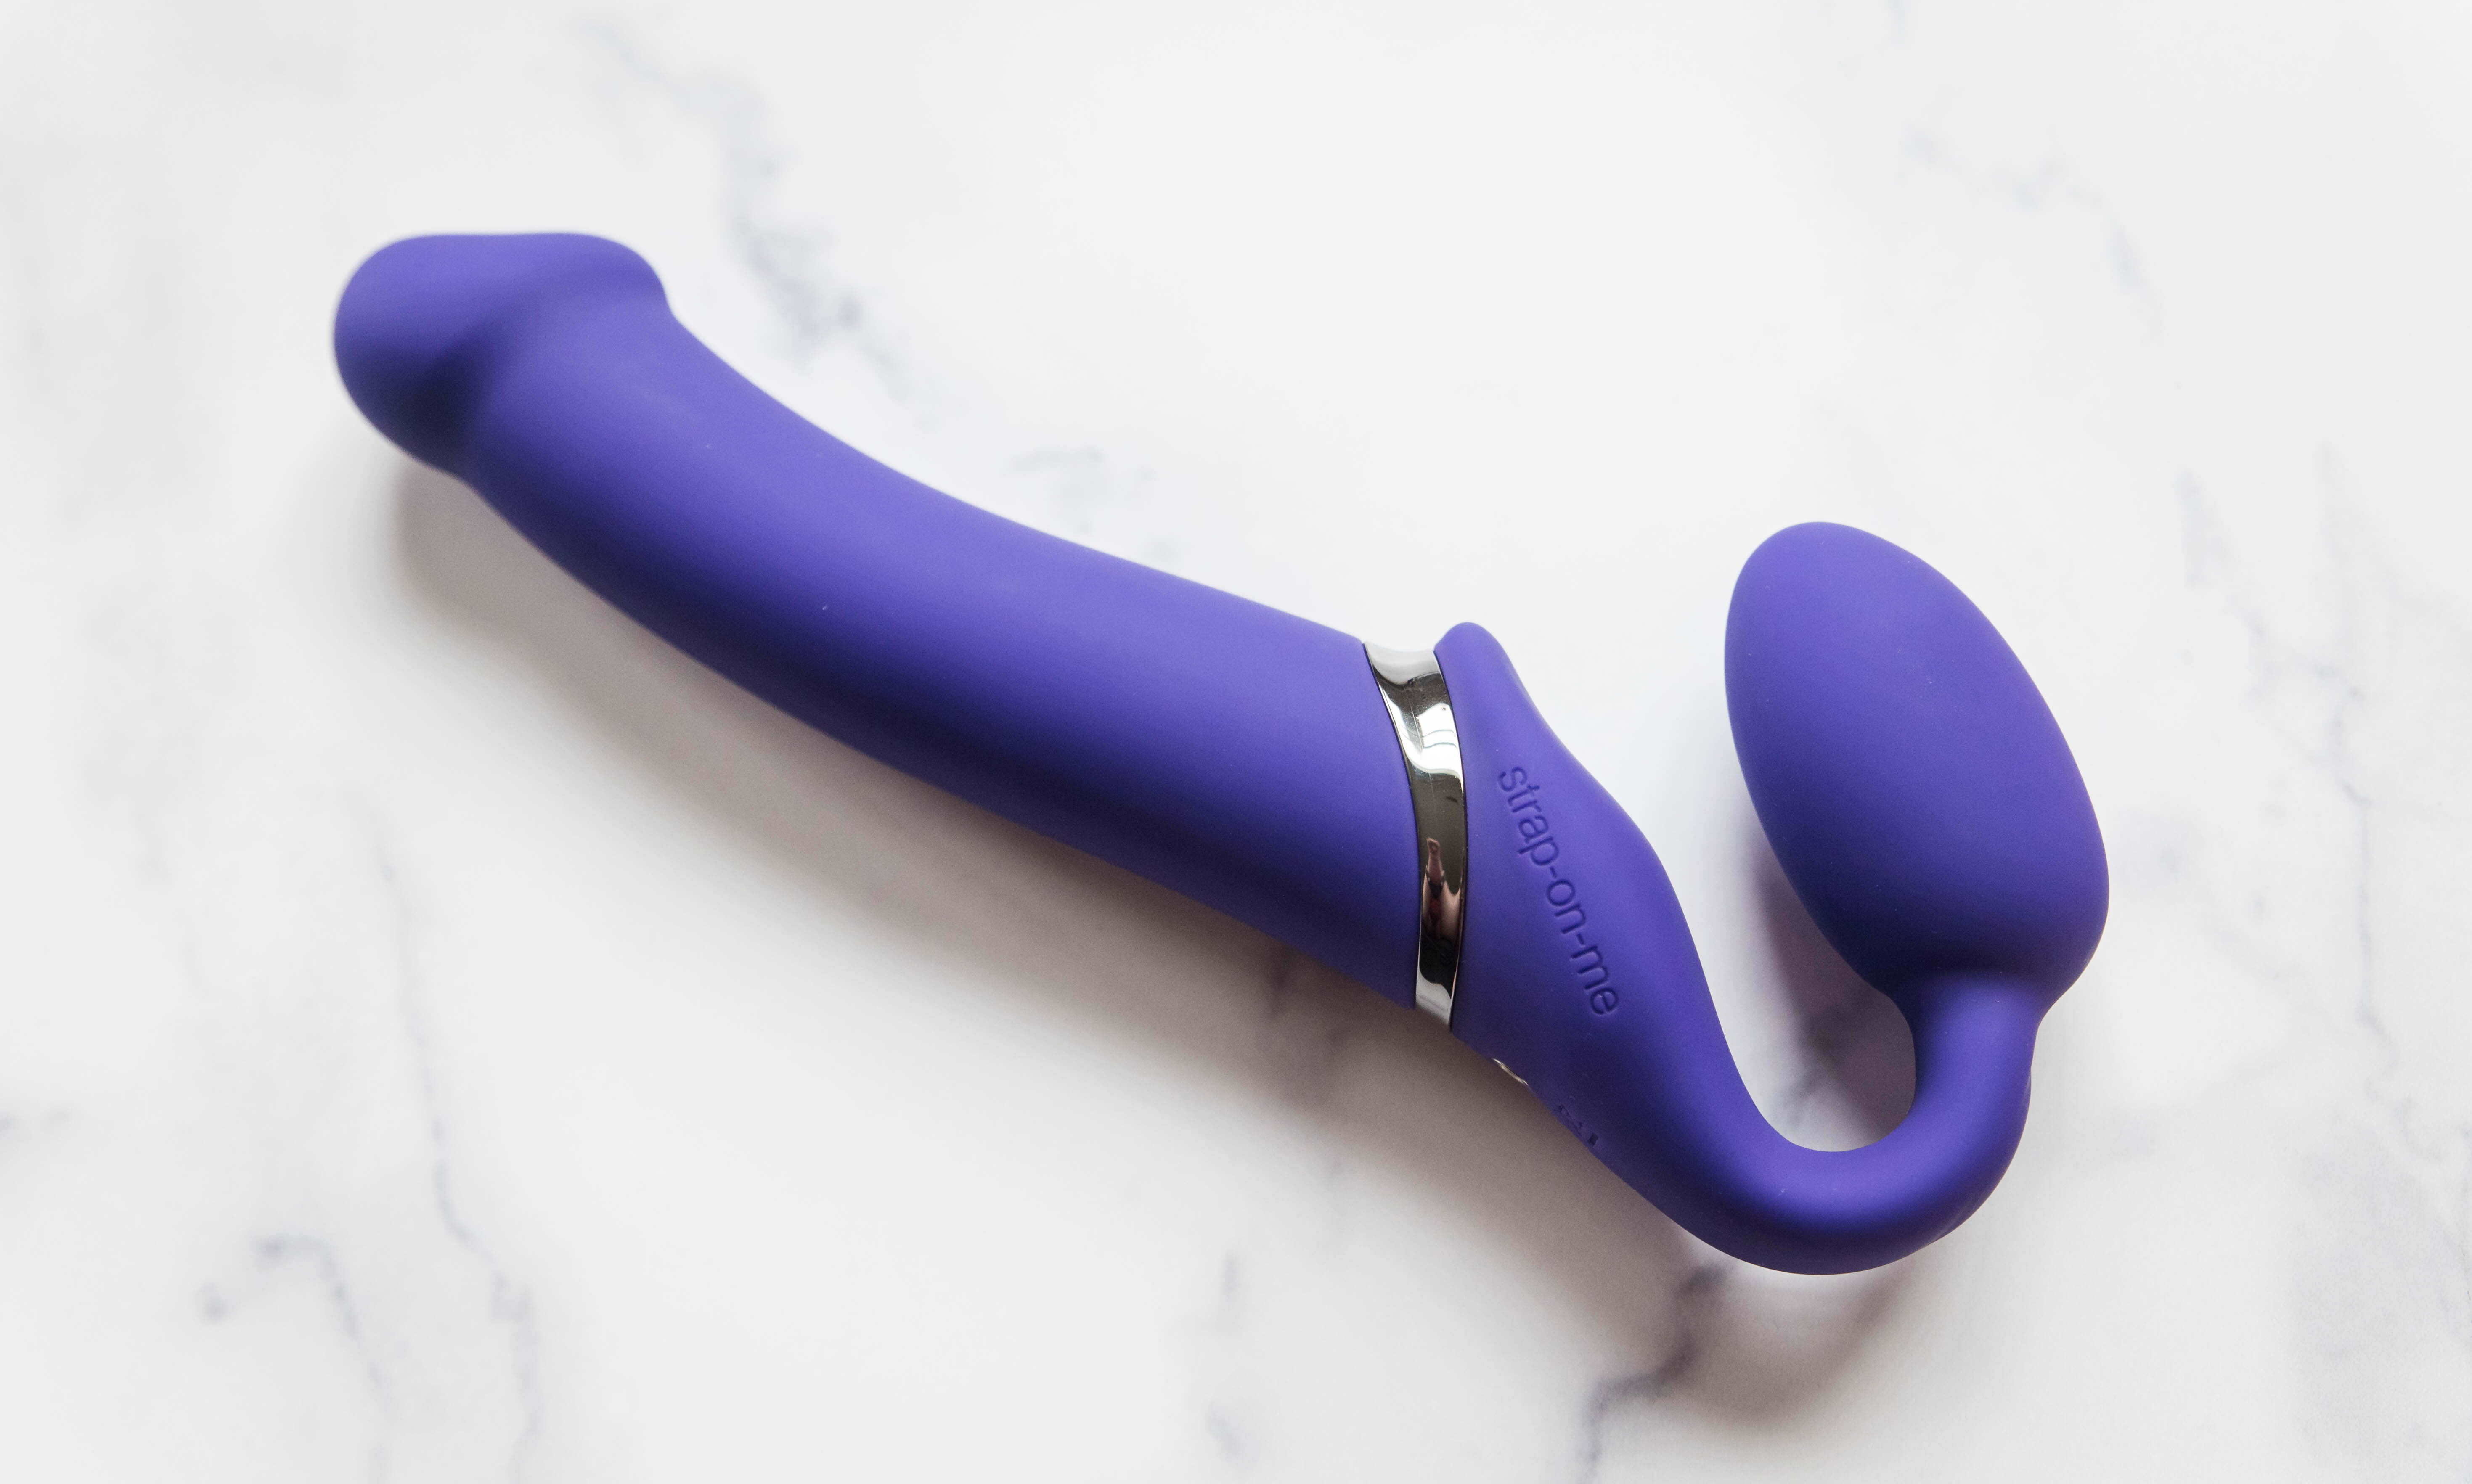 Strap On Me Strapless Strap On Dildo - Size Small Review